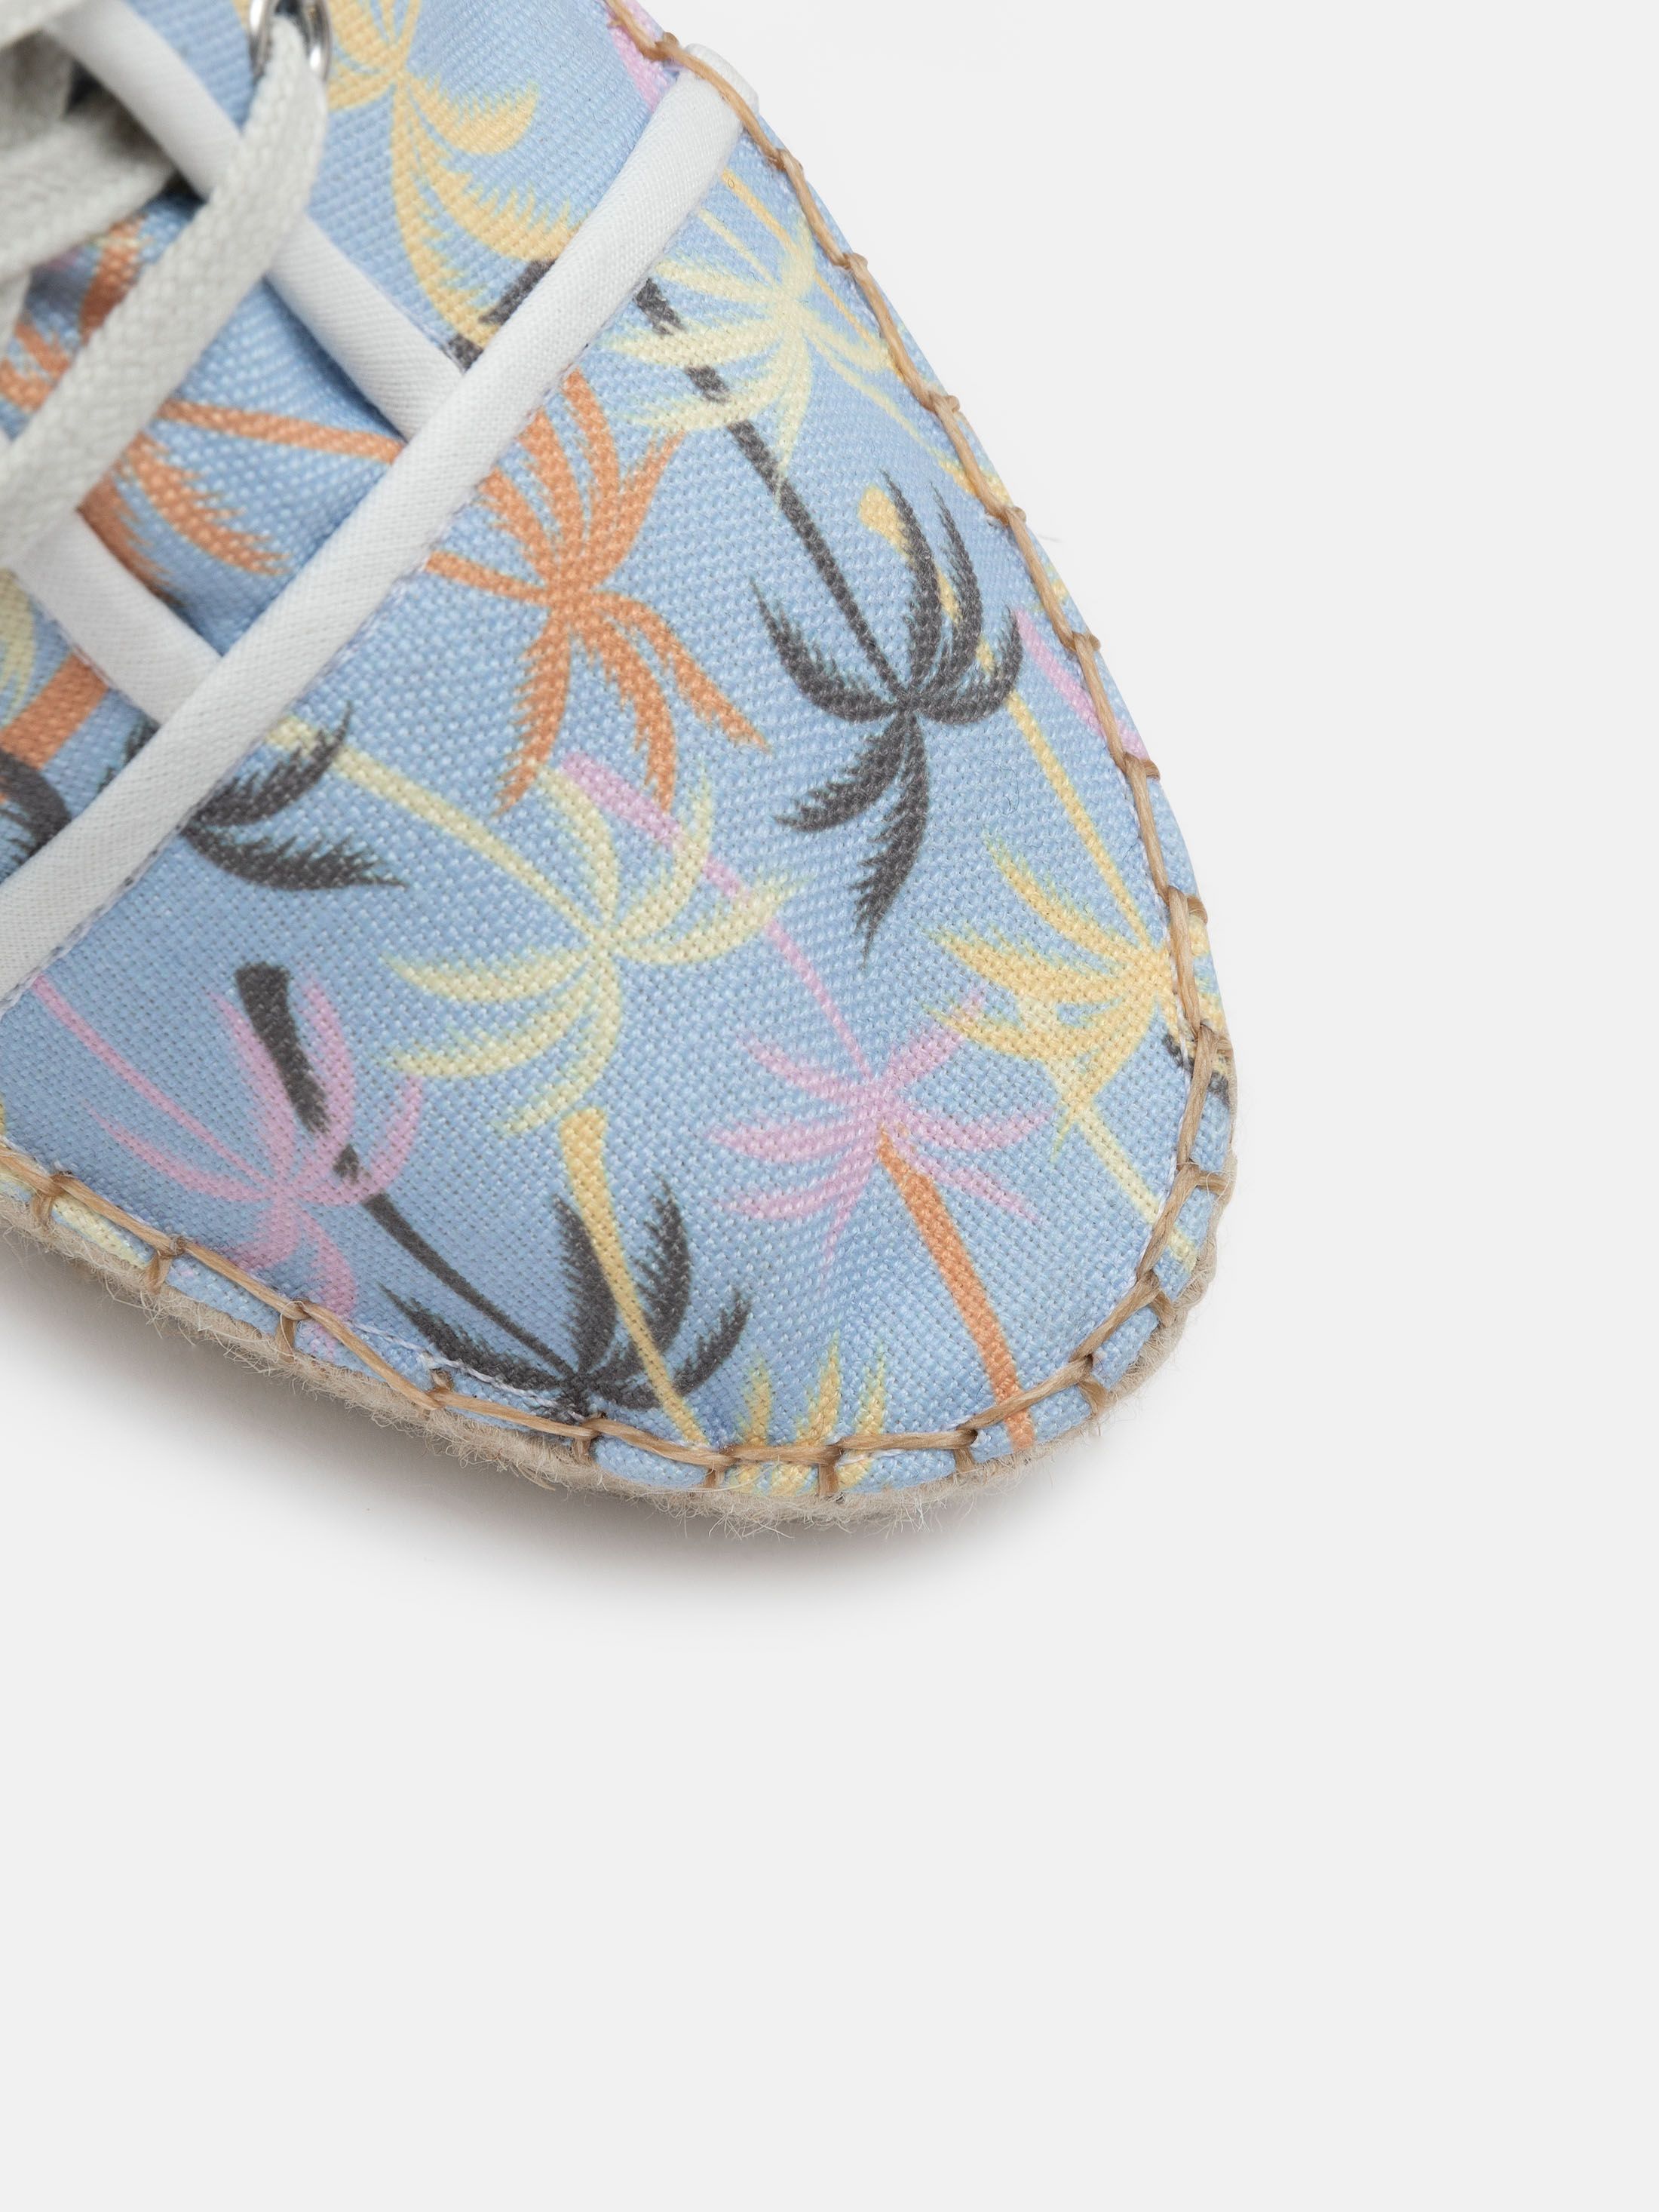 wedge espadrilles from side of design